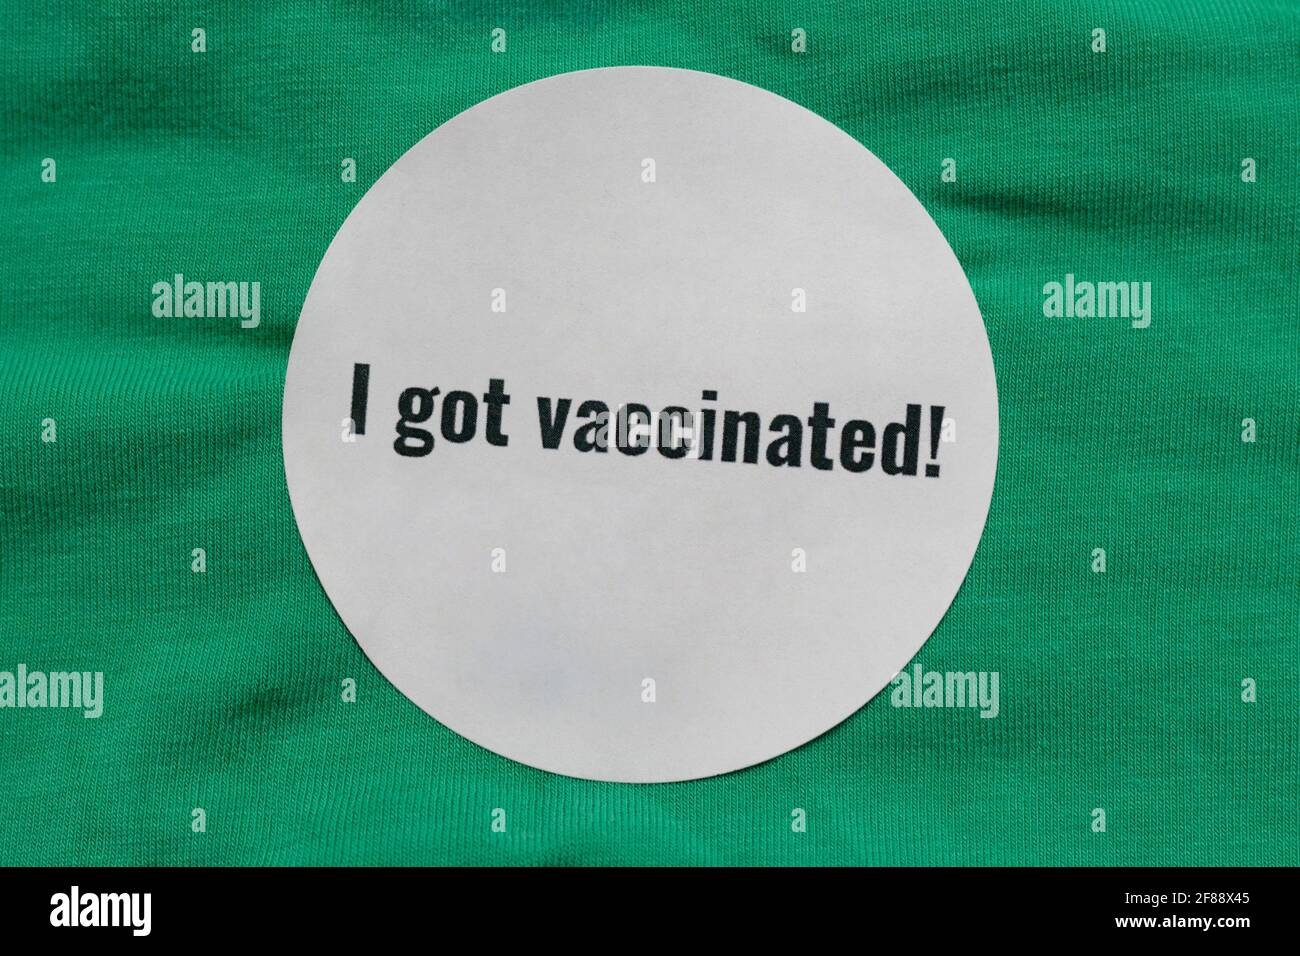 I got vaccinated sticker given out to people after receiving a covid-19 vaccination shot on a green background with copy space Stock Photo